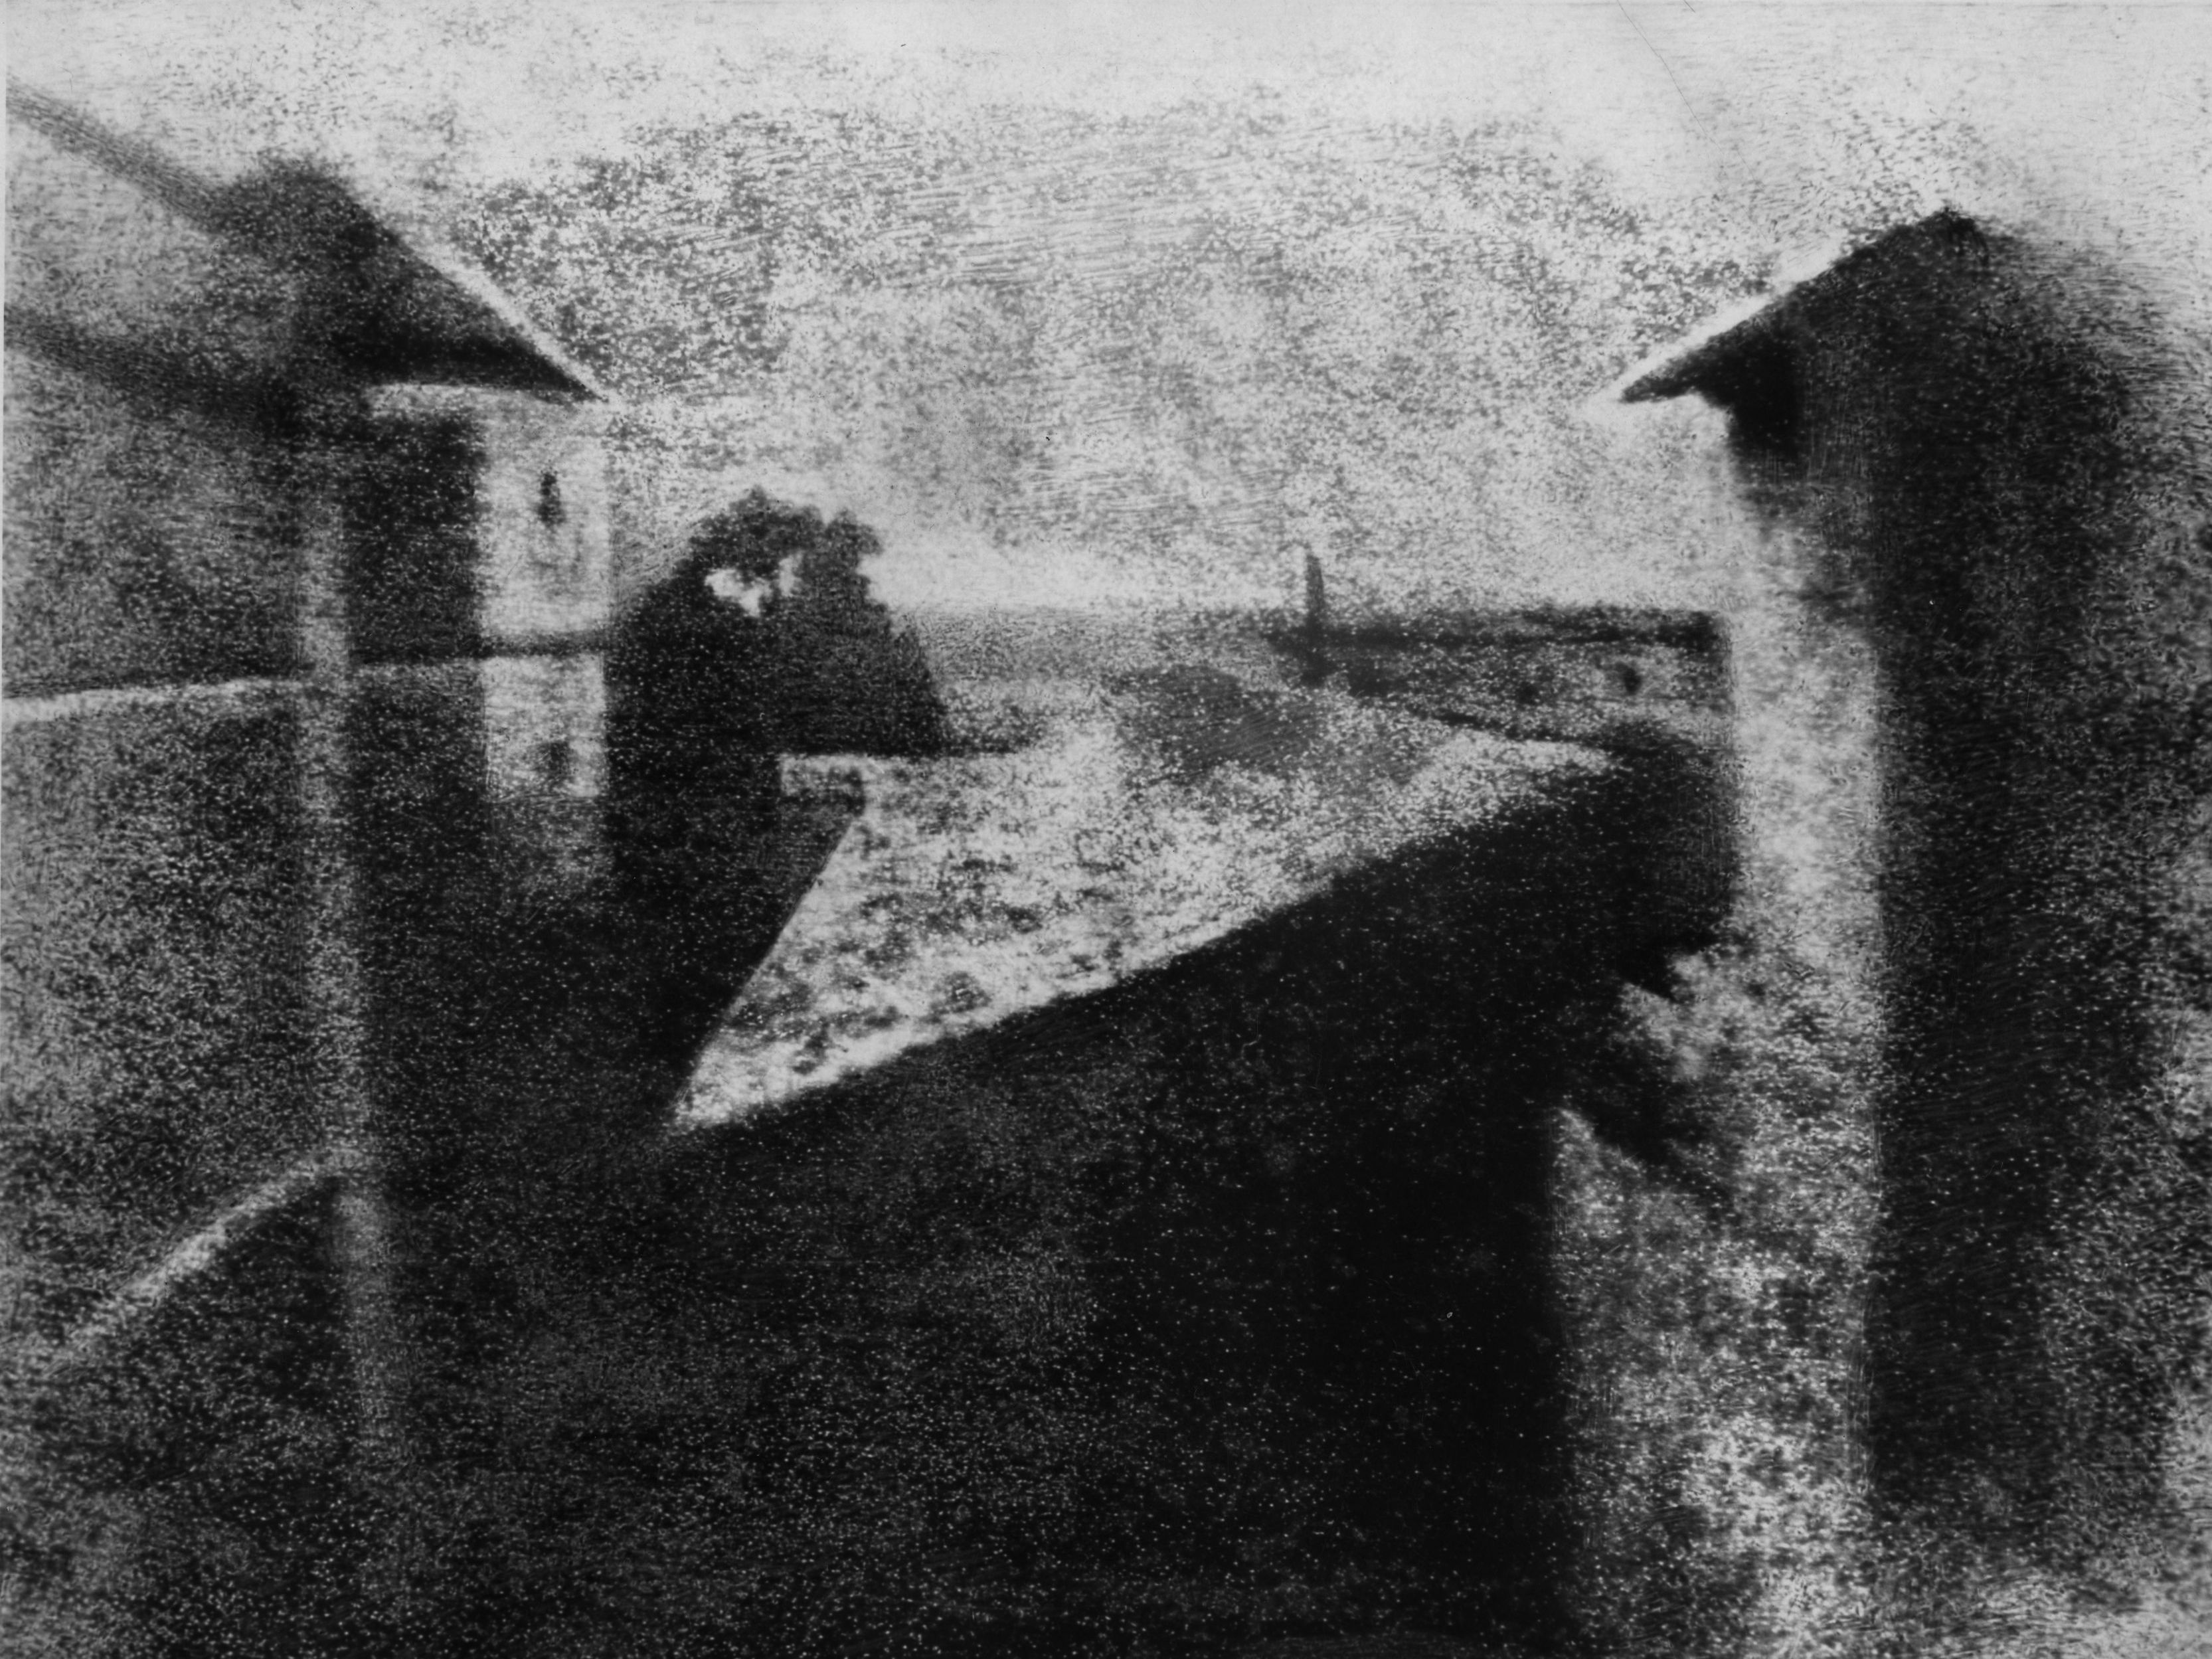 first photograph by Joseph Nicophore Niepce from 1922